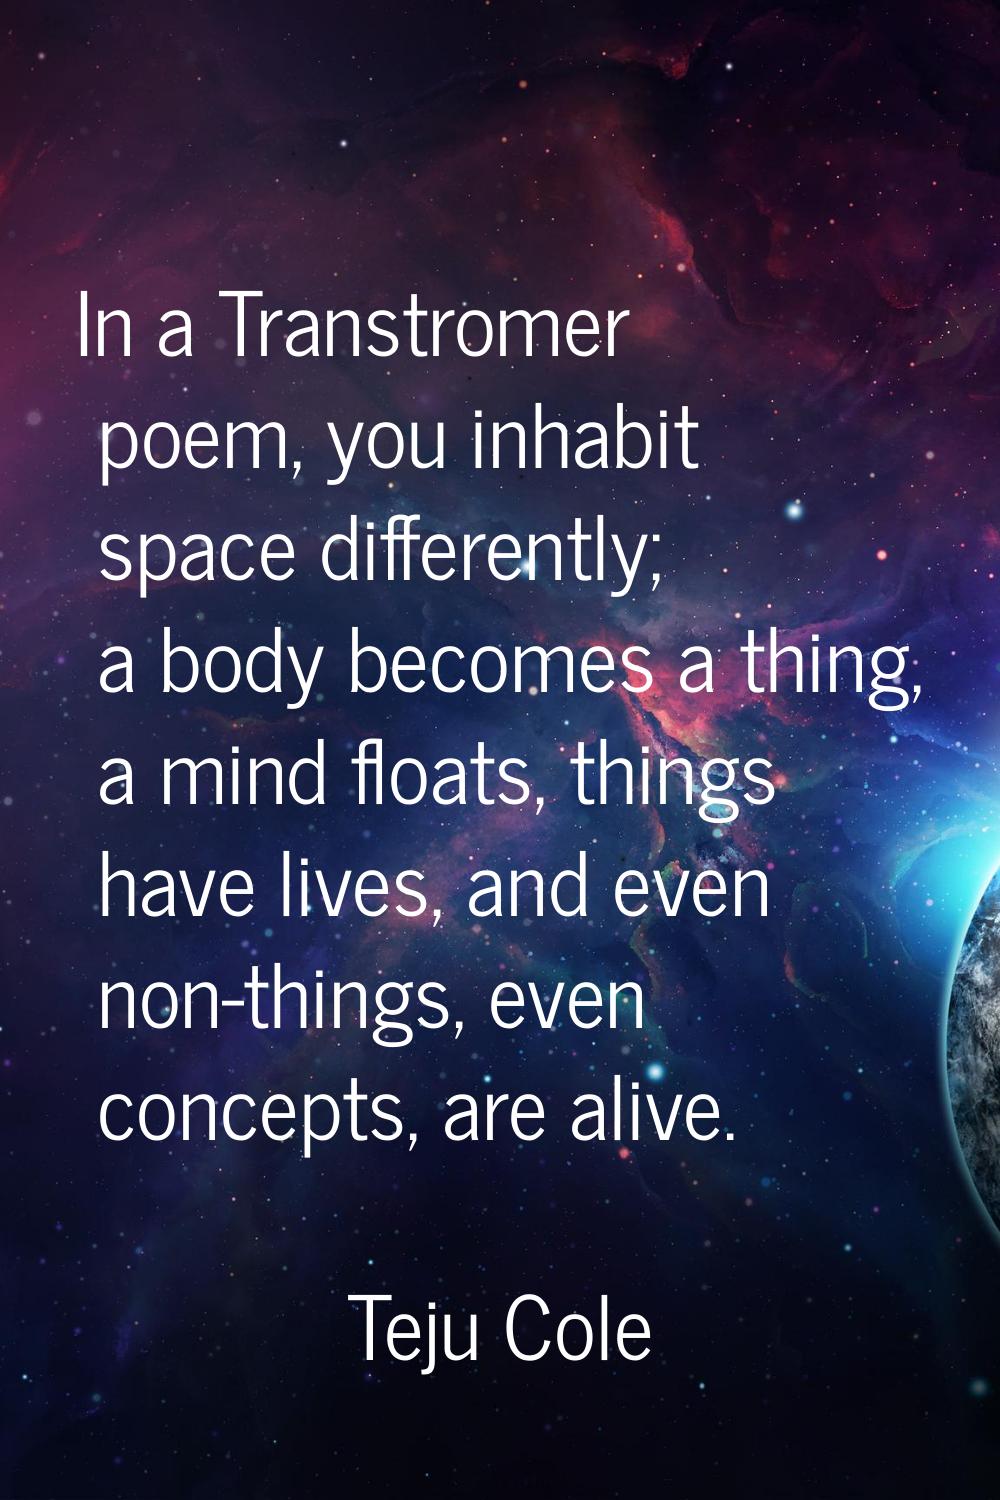 In a Transtromer poem, you inhabit space differently; a body becomes a thing, a mind floats, things